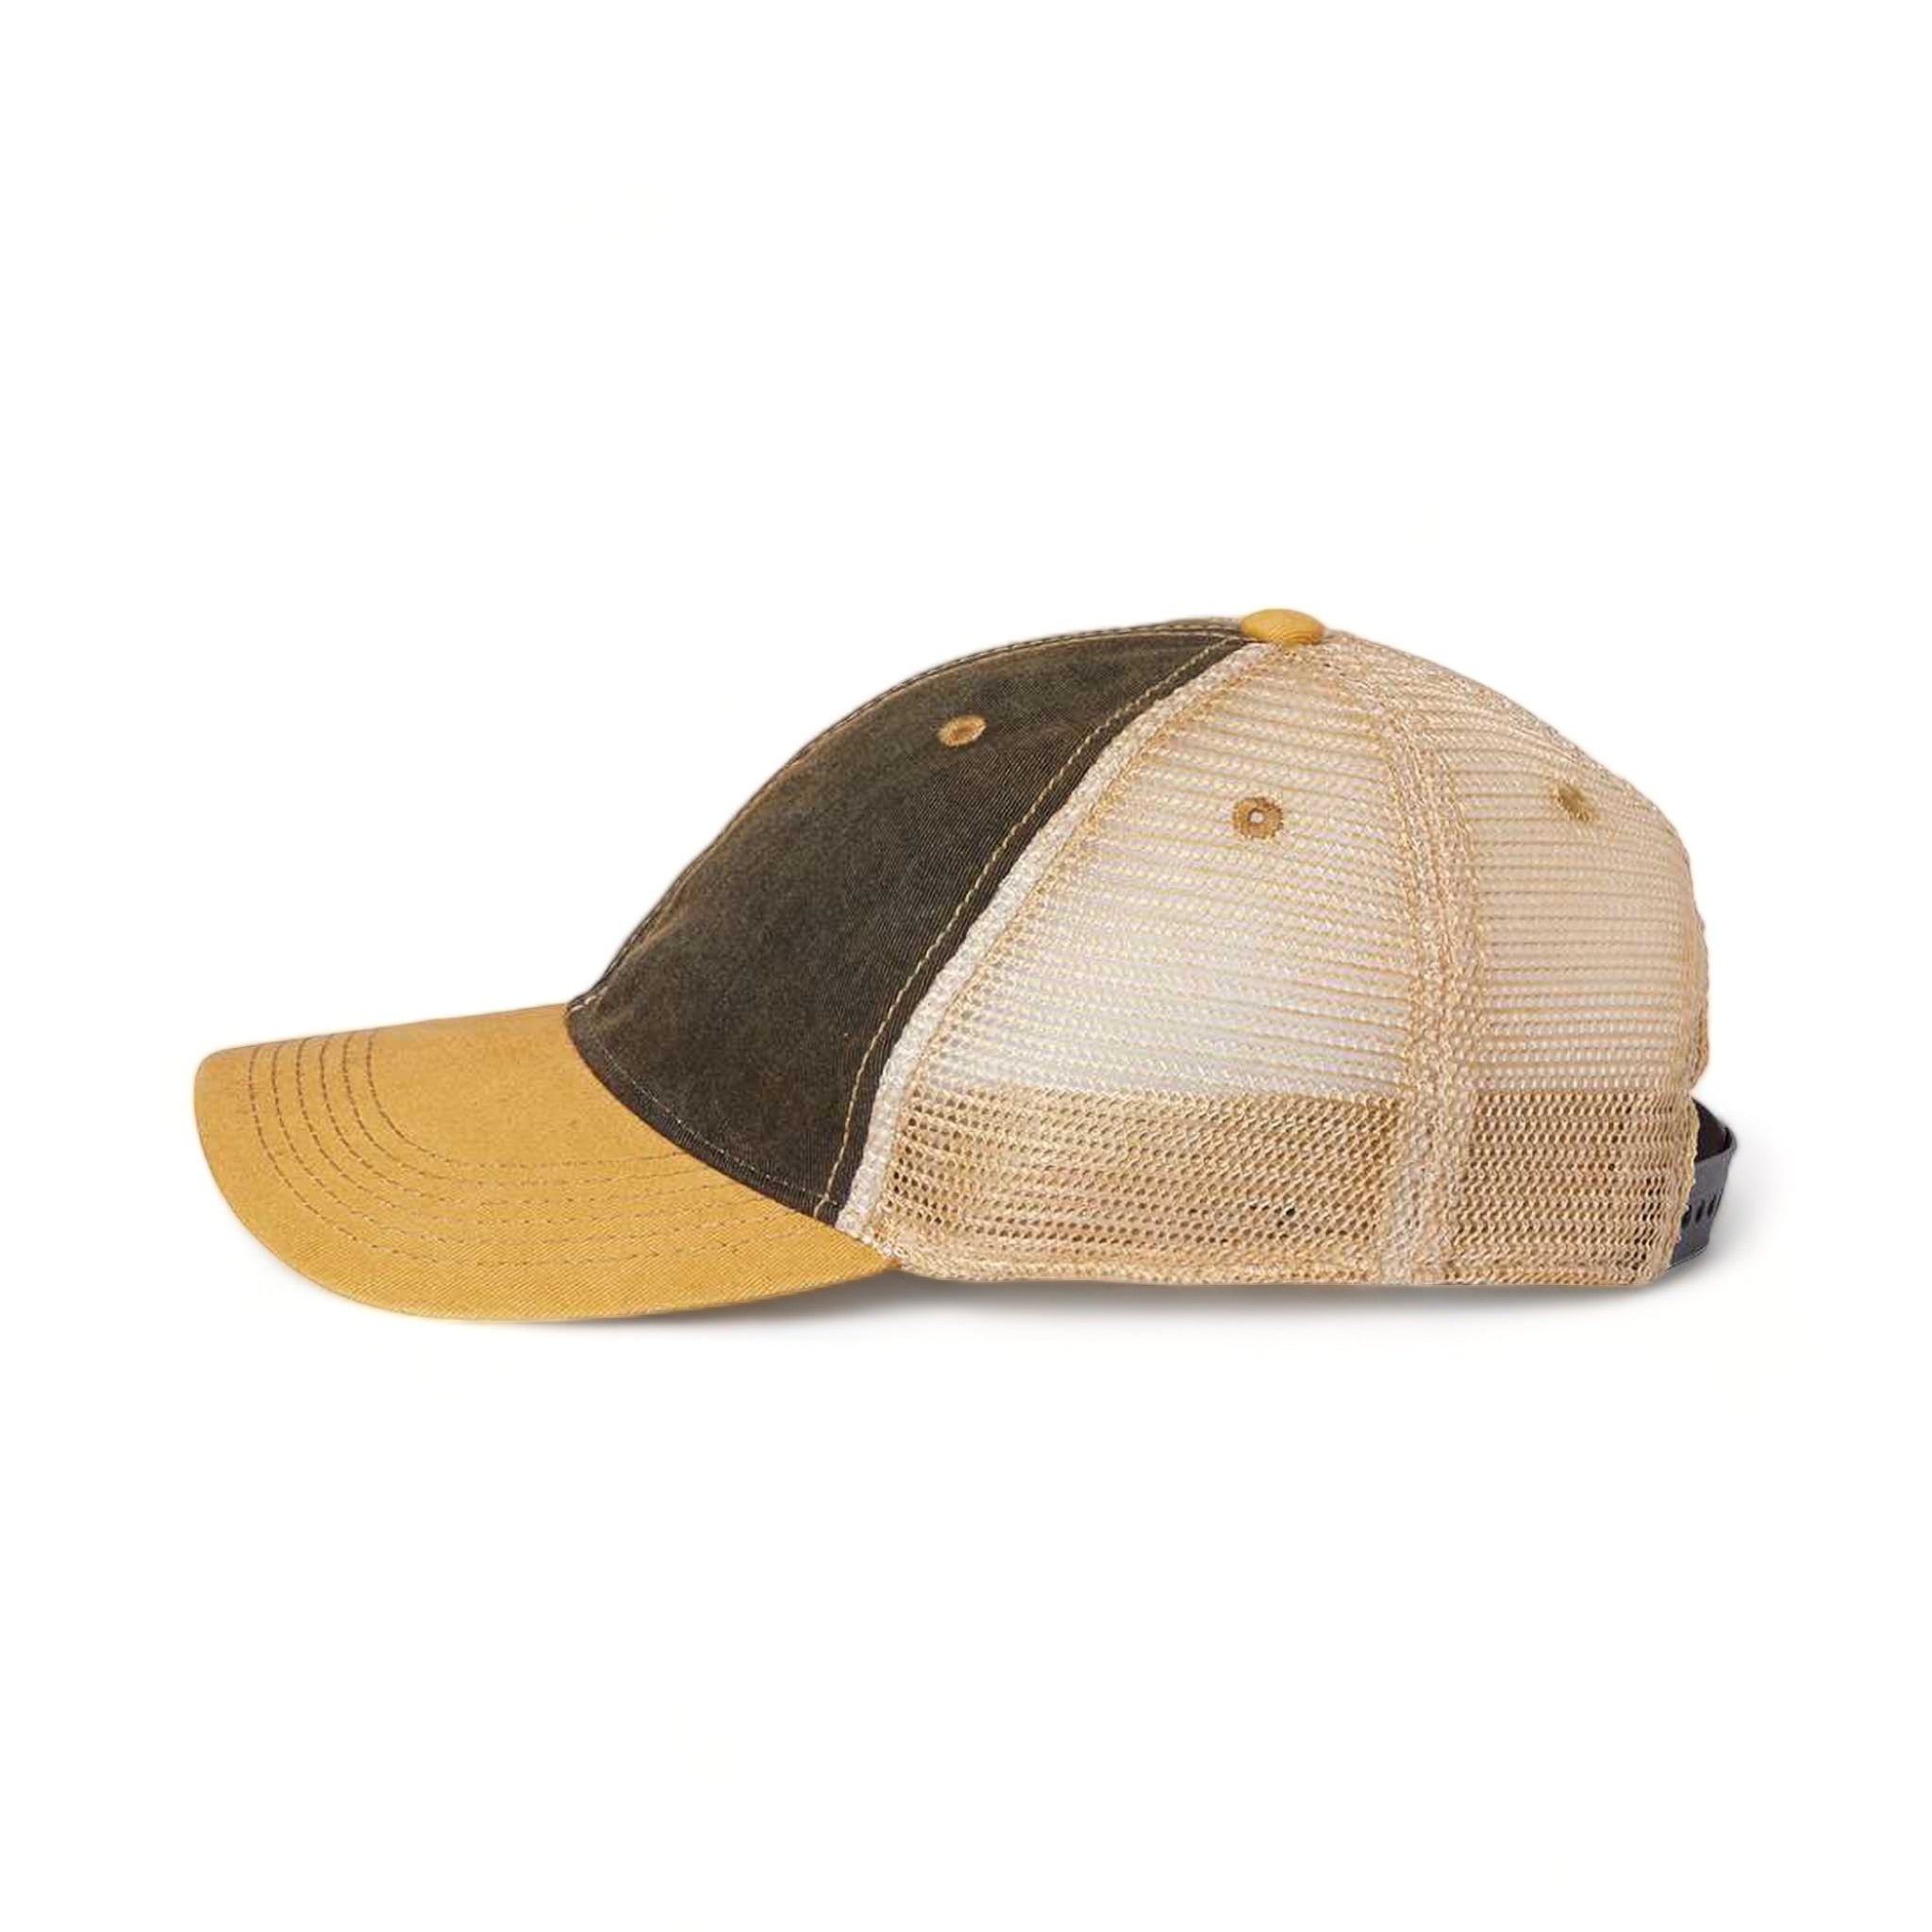 Side view of LEGACY OFA custom hat in black, yellow and khaki